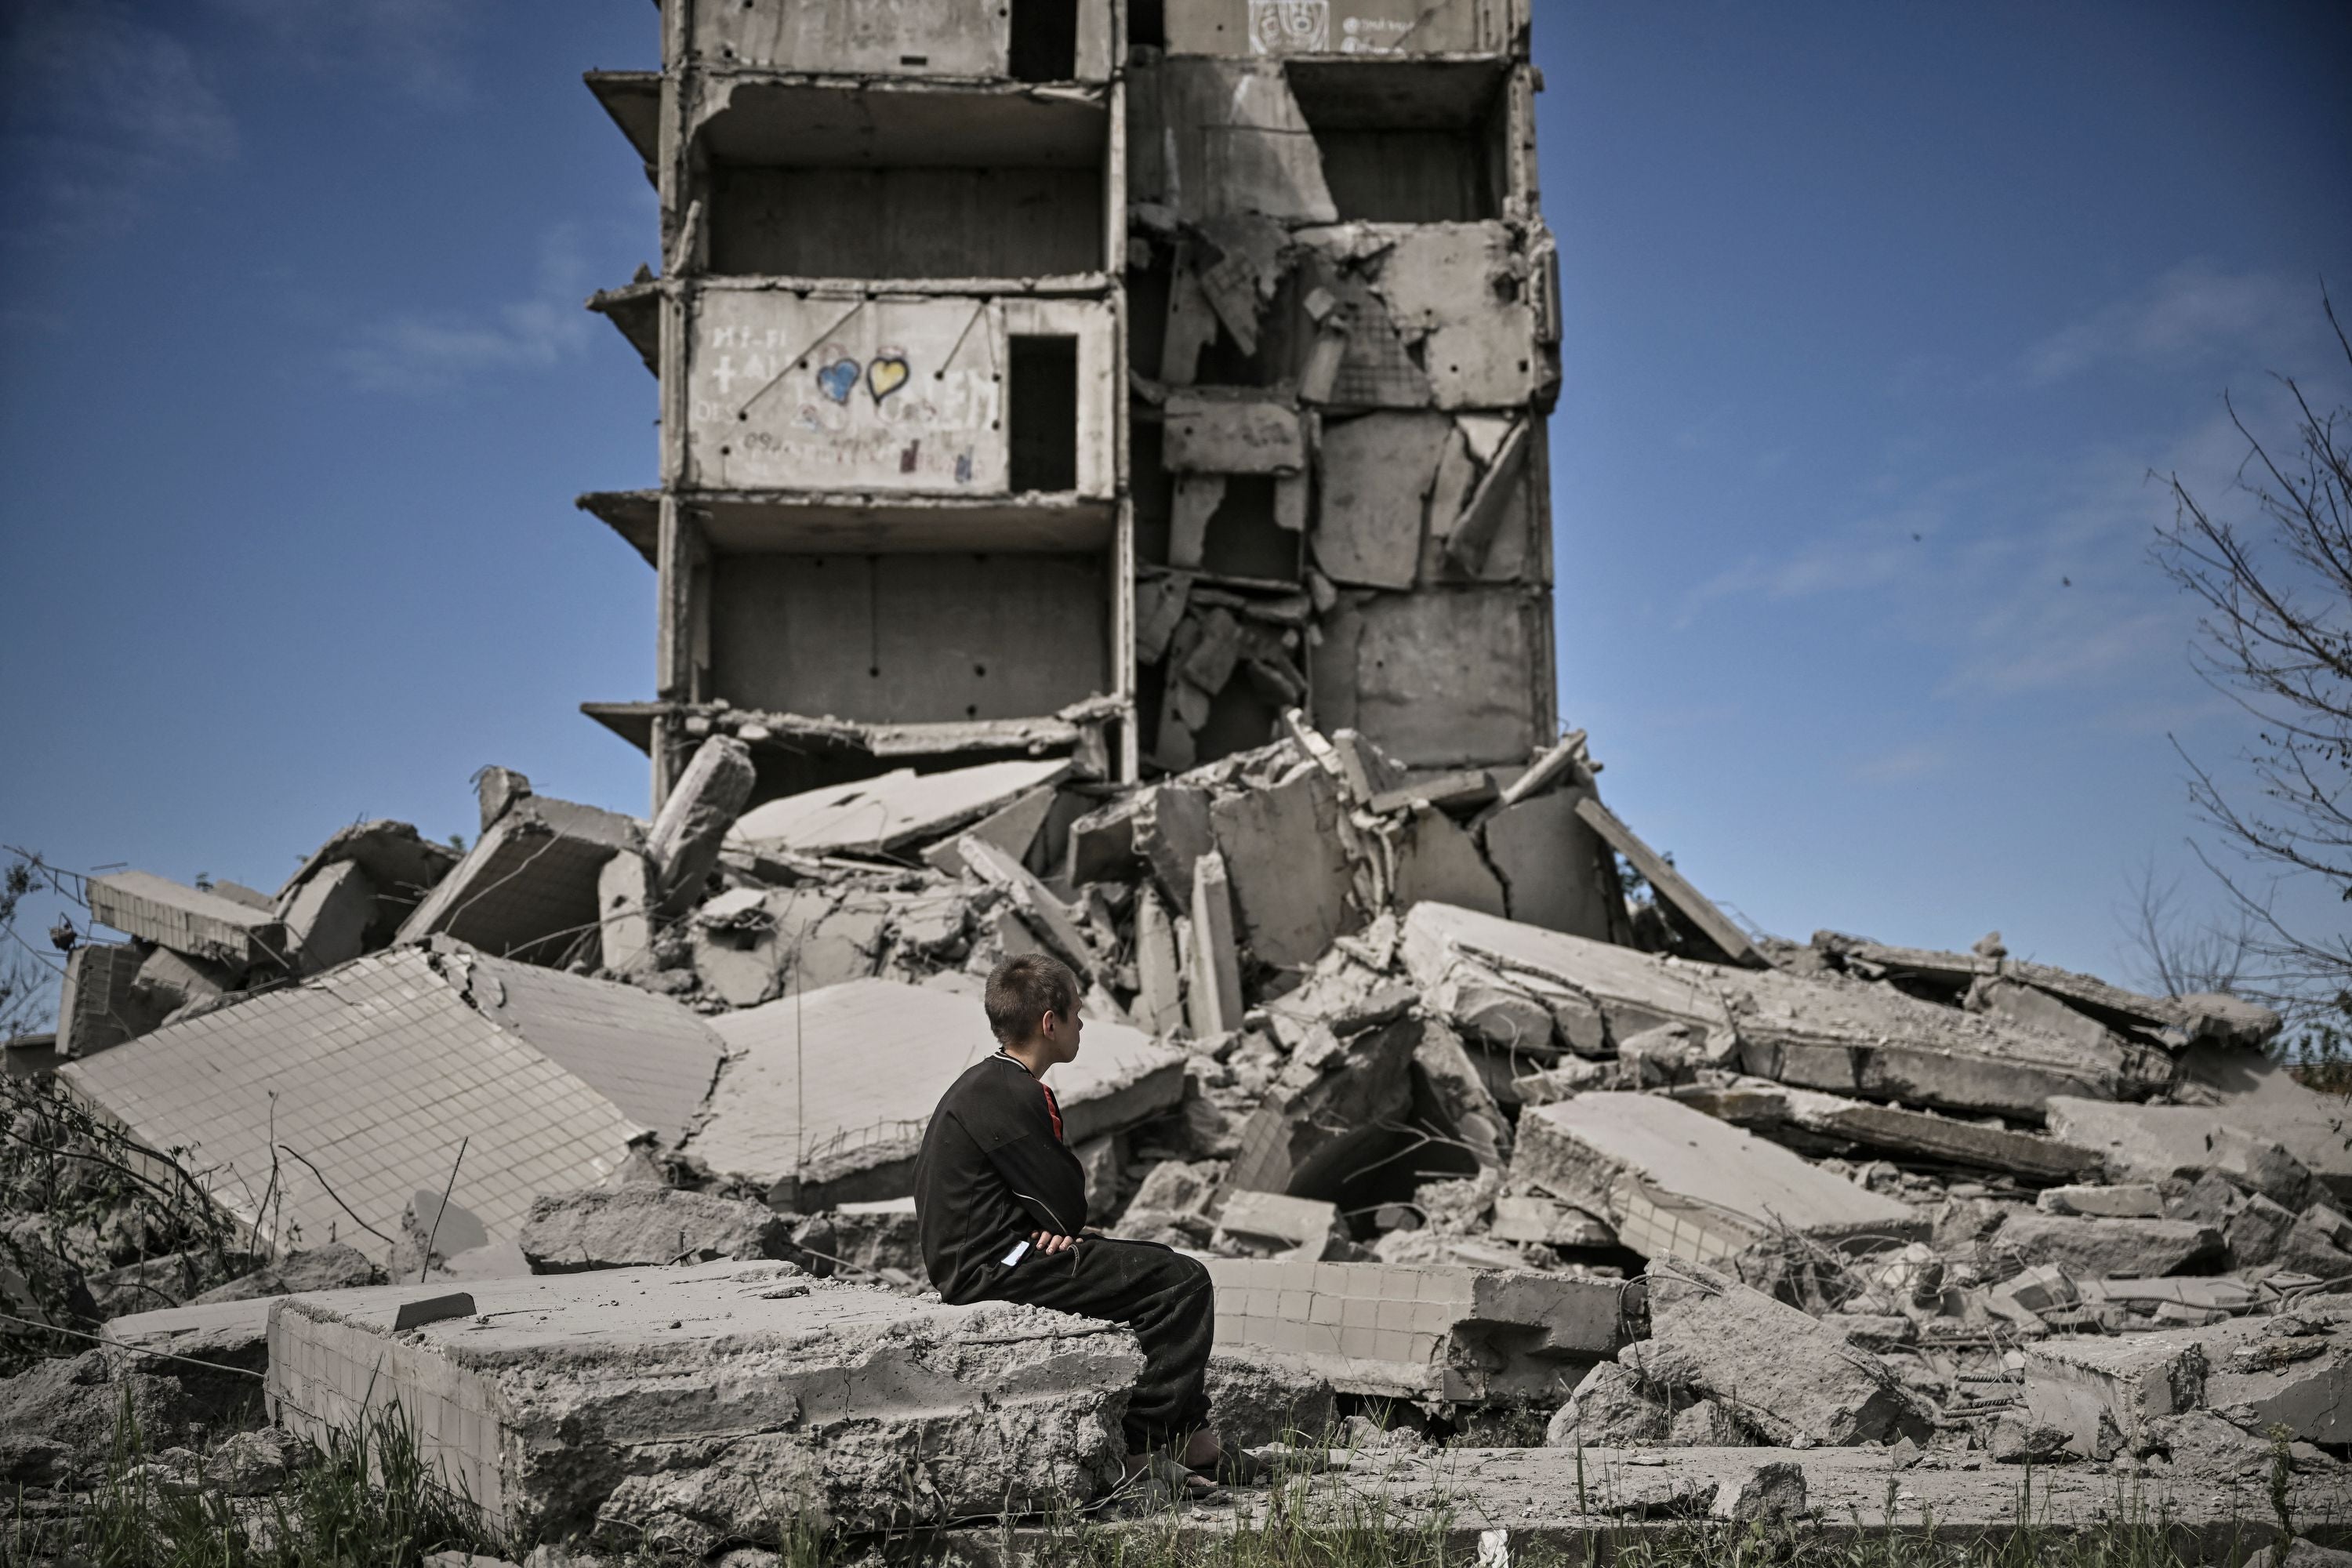 A young boy sits in front of a damaged building after a strike in Kramatorsk in the eastern Ukranian region of Donbas